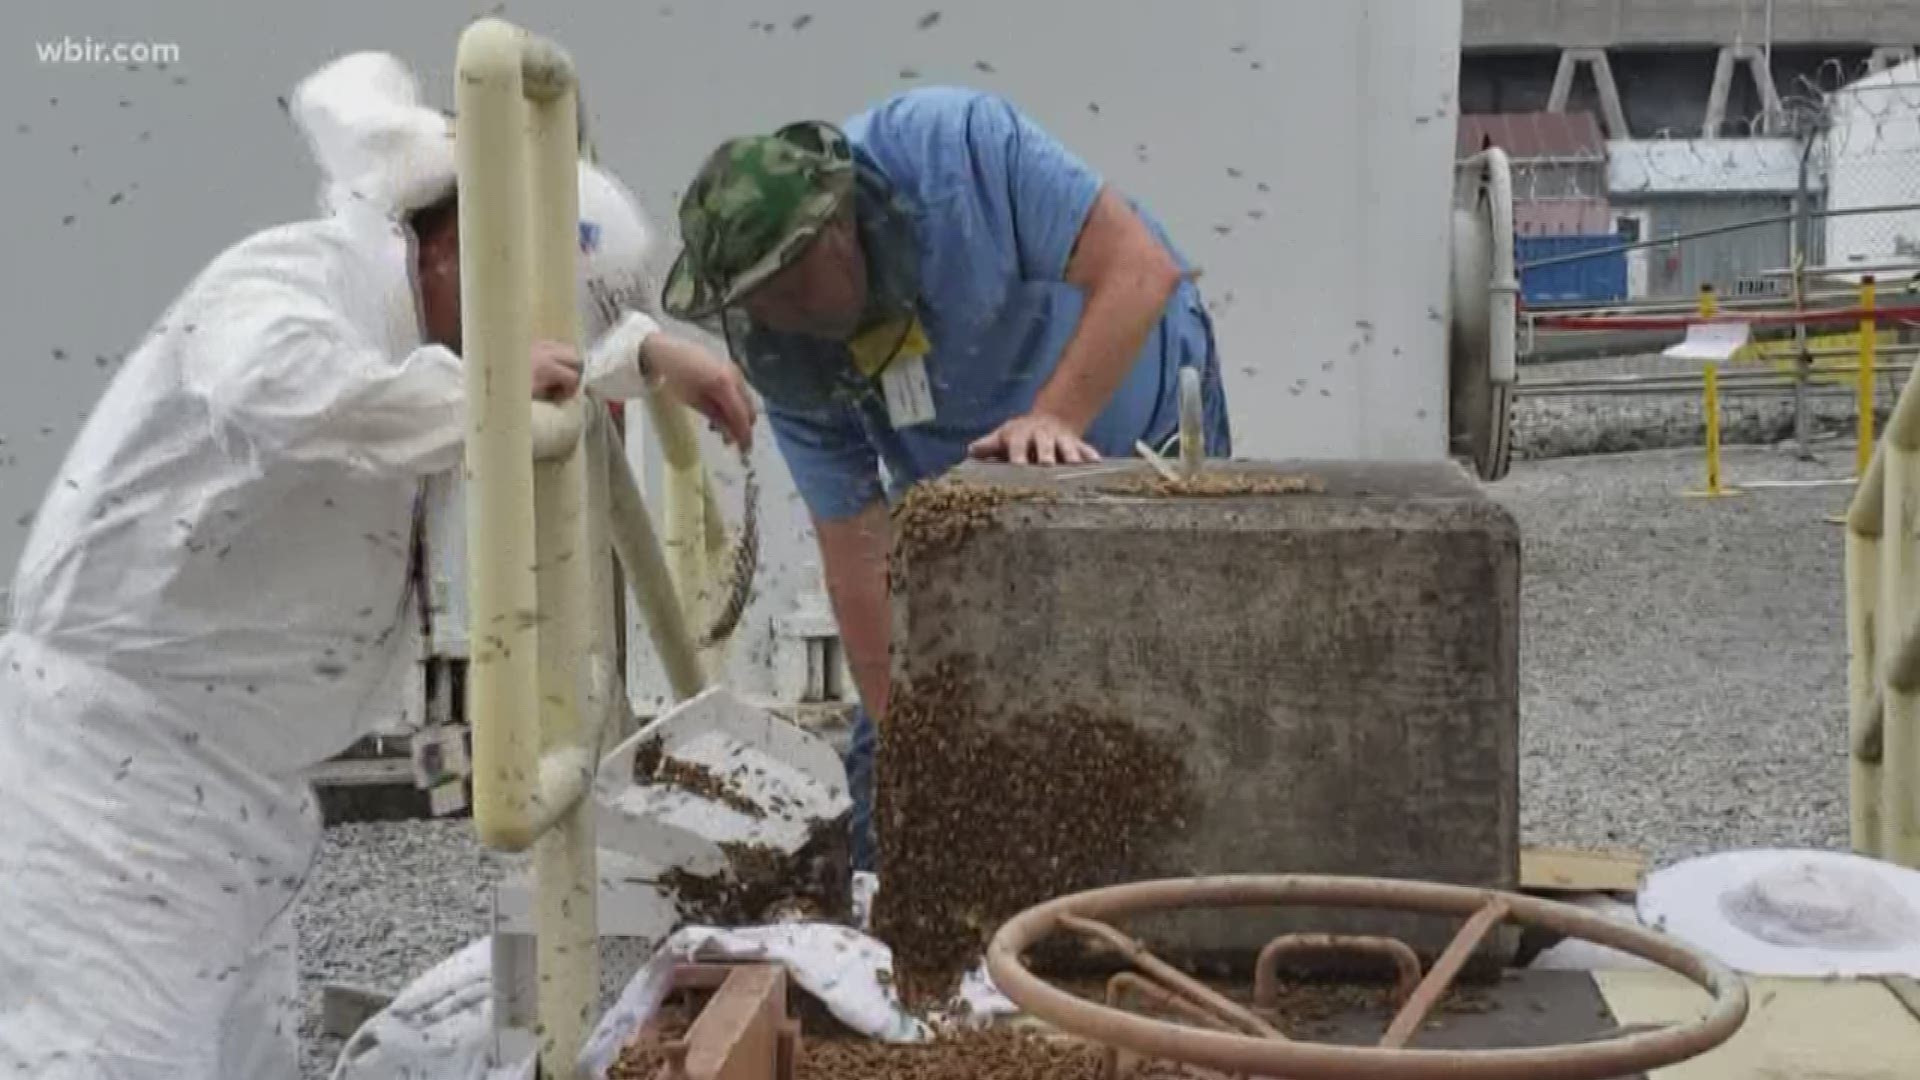 A swarm of honeybees discovered at Watts Bar Nuclear Plant last May is thriving months after being relocated.